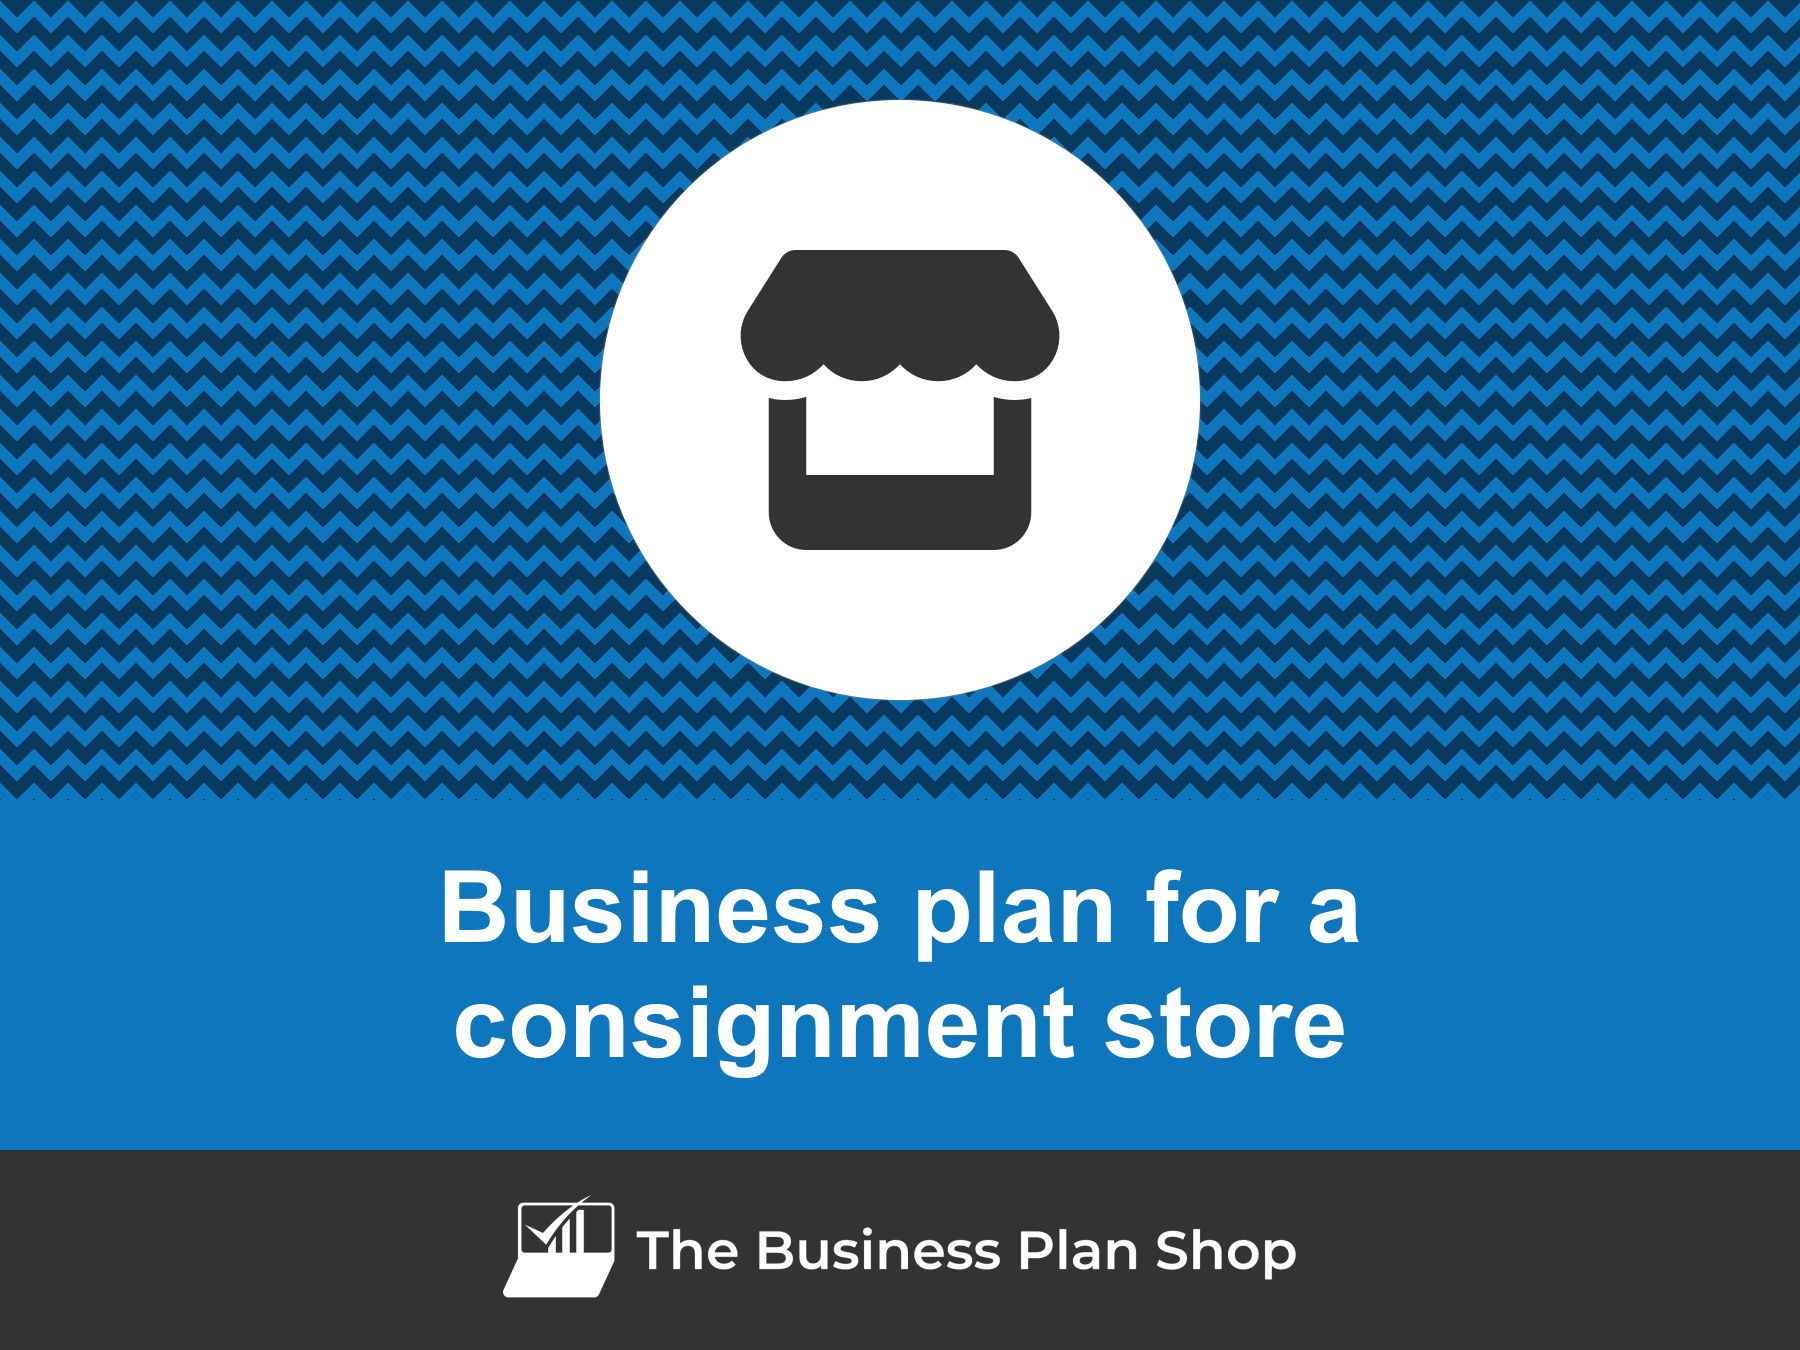 consignment business plan